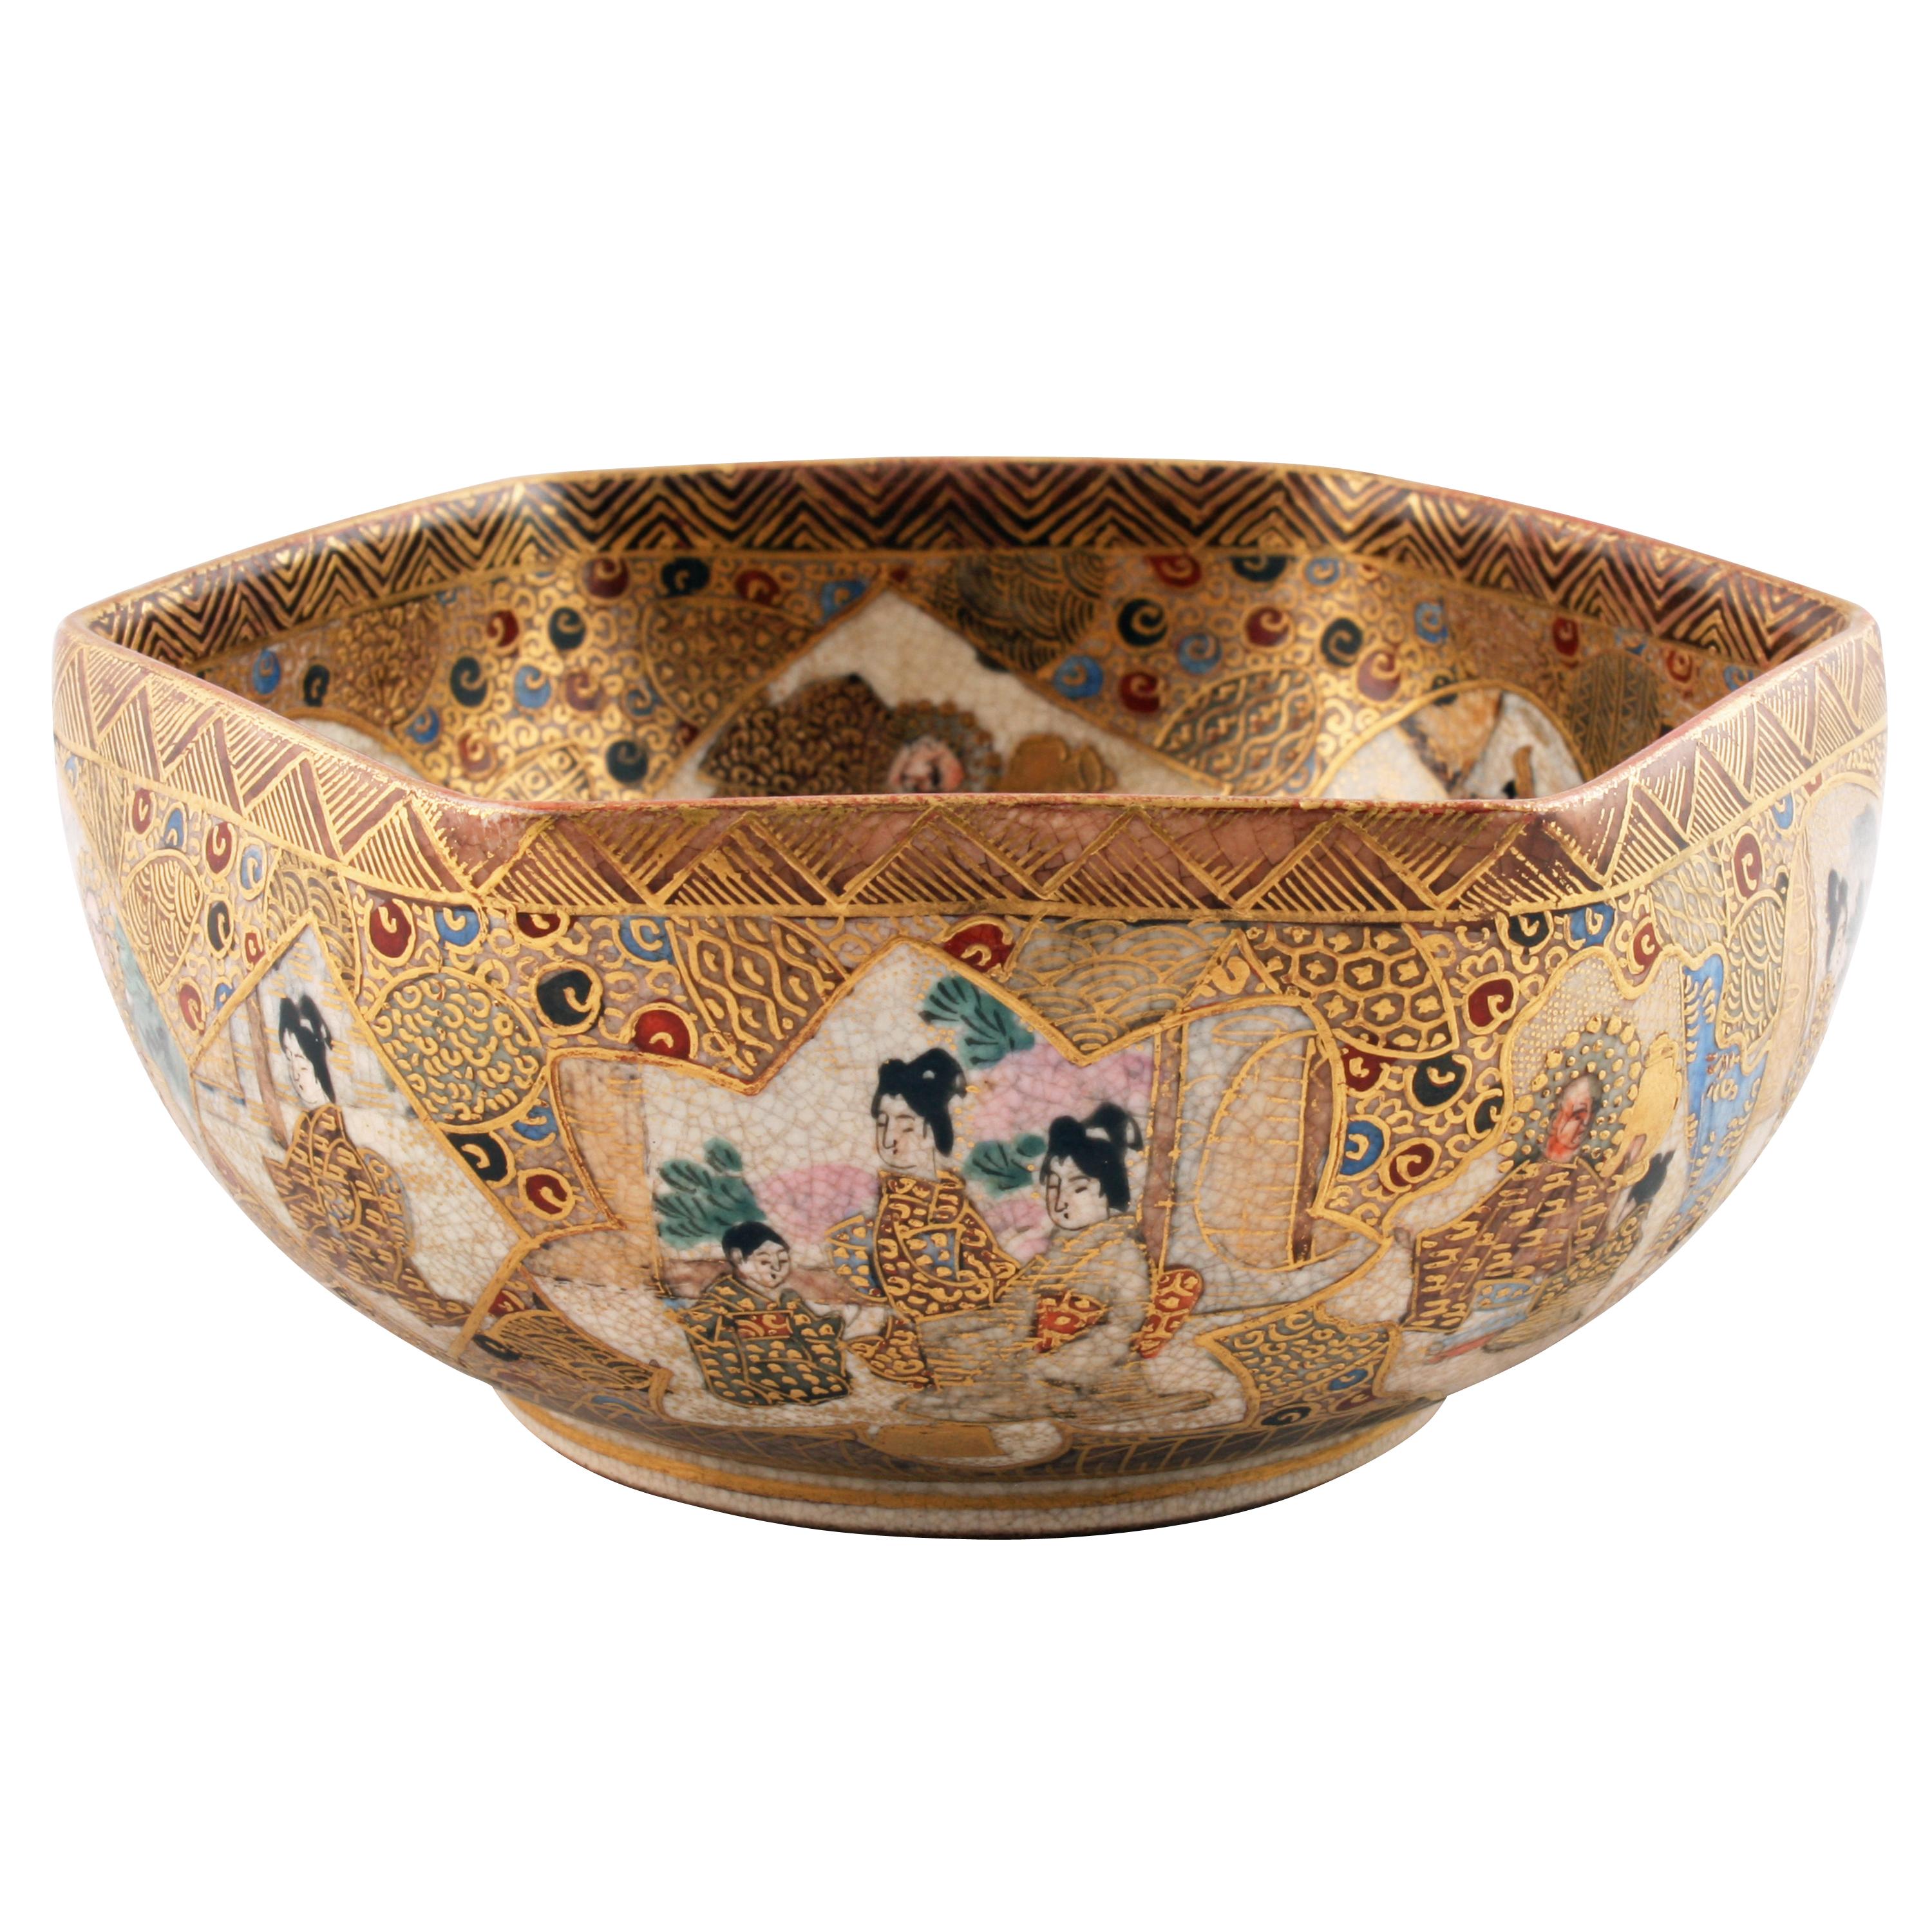 A late 19th century Japanese Satsuma pottery hexagonal shaped bowl by Shimazu, Meiji Period (1864-1912).


The bowl has a total of 15 hand painted panels inside and out depicting Japanese scenes of traditional dress (Bijin), Buddist monks (Kannon